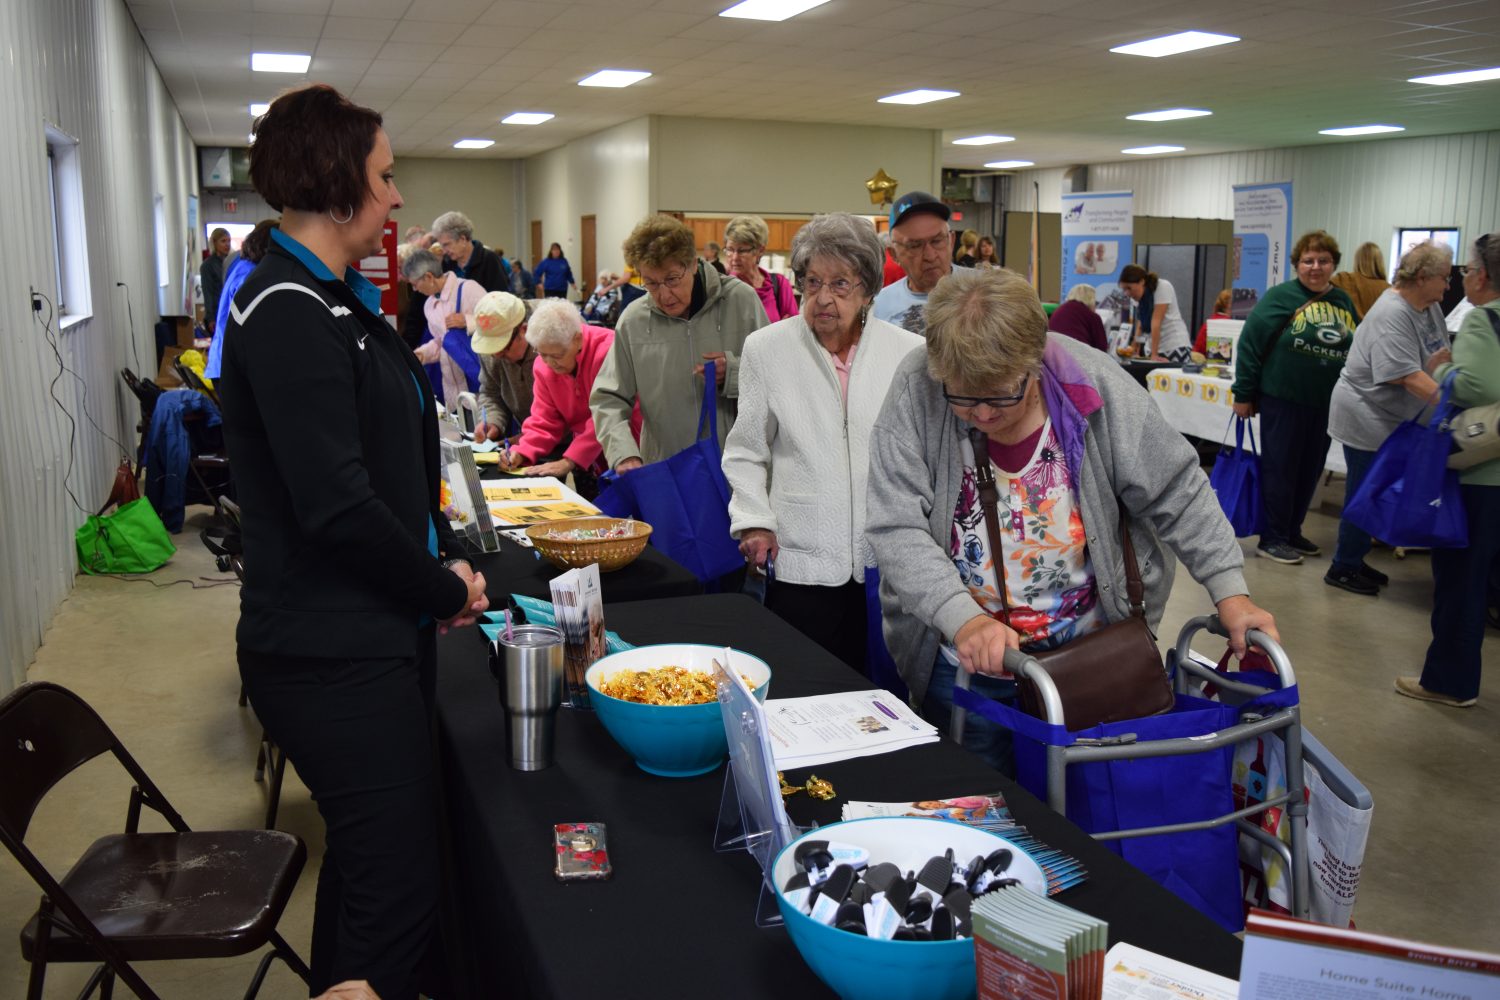 A steady stream of seniors made its way through the Central Wisconsin State Fairgrounds' Junior Expo building for health and wellness information, job coaching, and other services available to the Marshfield area community at the senior informational fair Oct. 6.